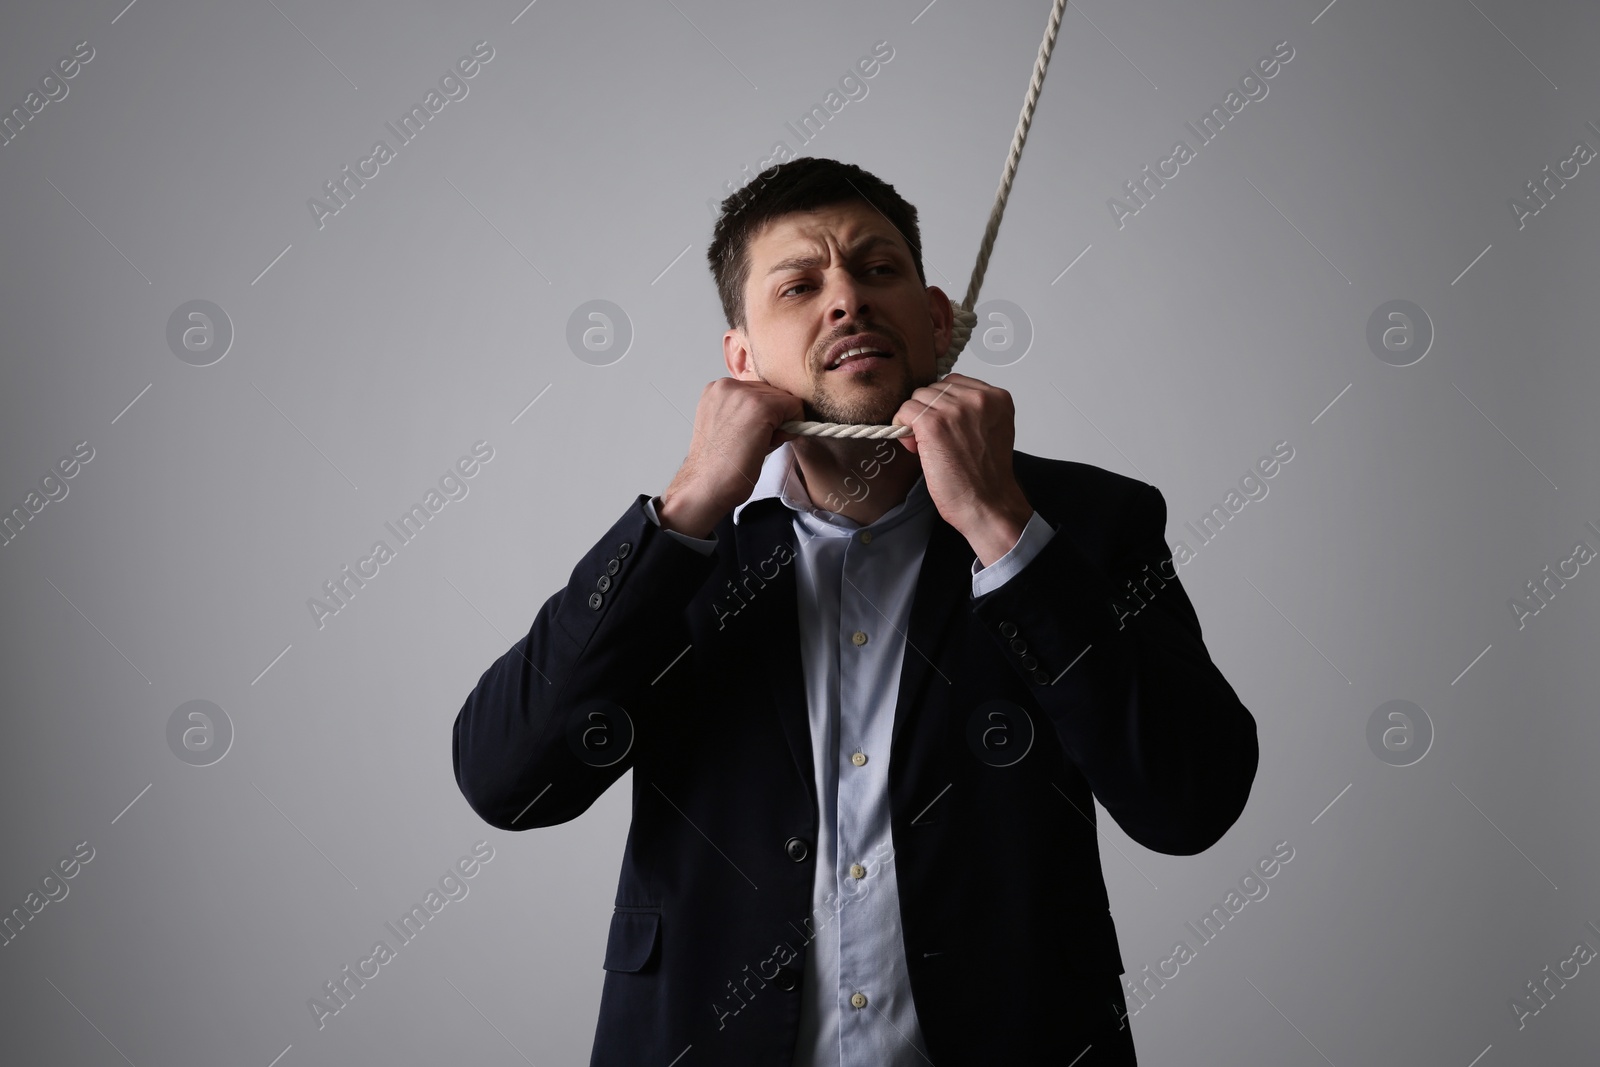 Photo of Depressed businessman with rope noose on neck against light grey background